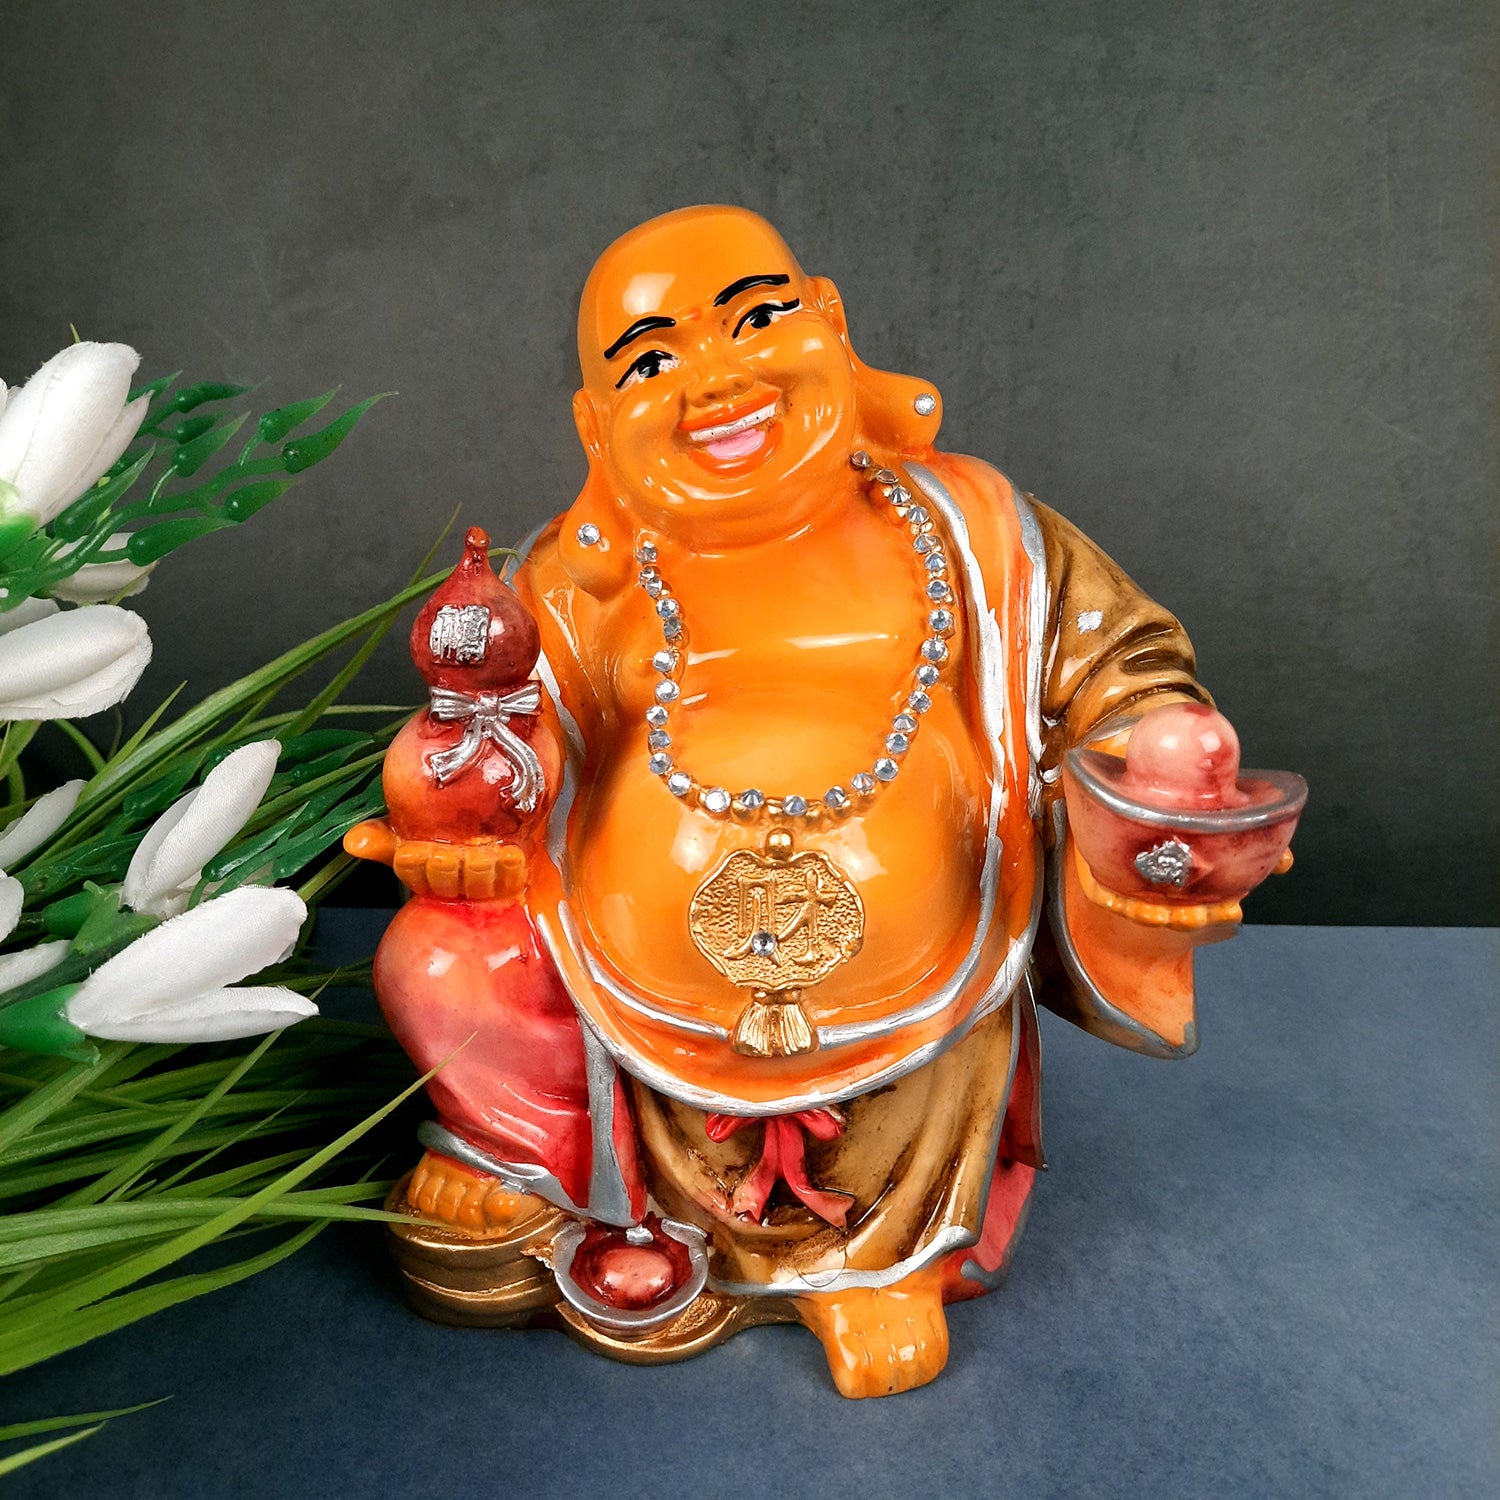 Laughing Buddha Statue | Happy Man Showpiece - for Money, Wealth, Health, Good Luck, Home, Table & Office Decor & Gift - 10 Inch - Apkamart